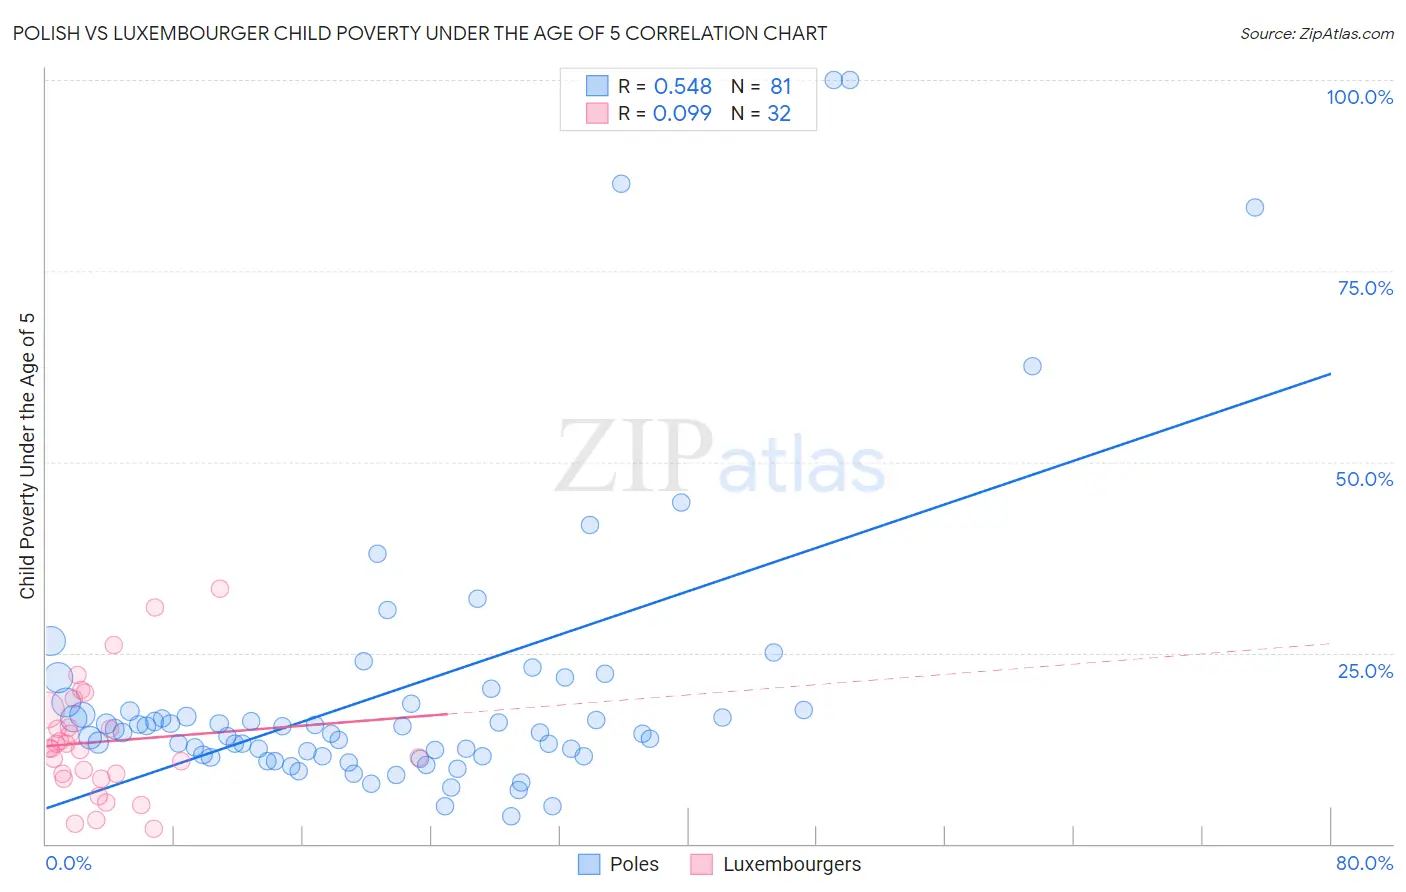 Polish vs Luxembourger Child Poverty Under the Age of 5